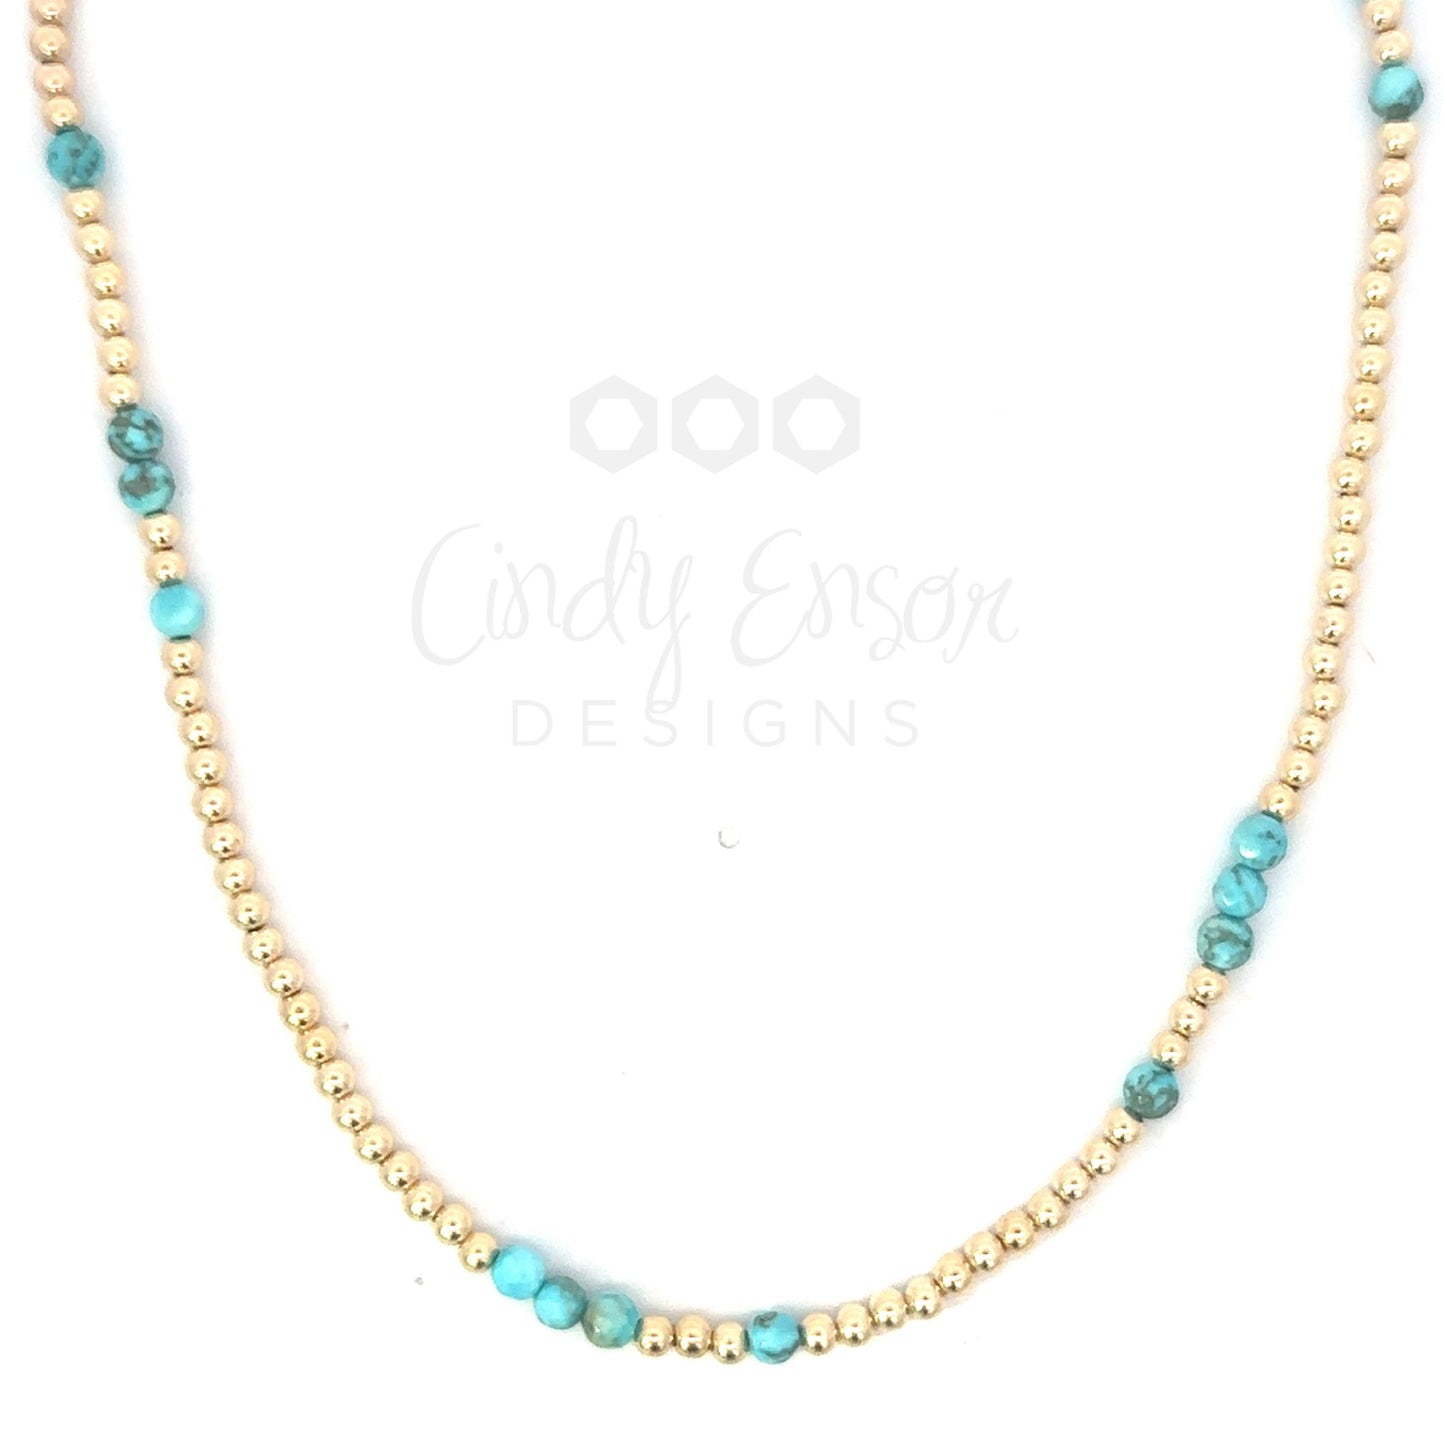 Gold Filled Beaded Necklace with Colored Stones